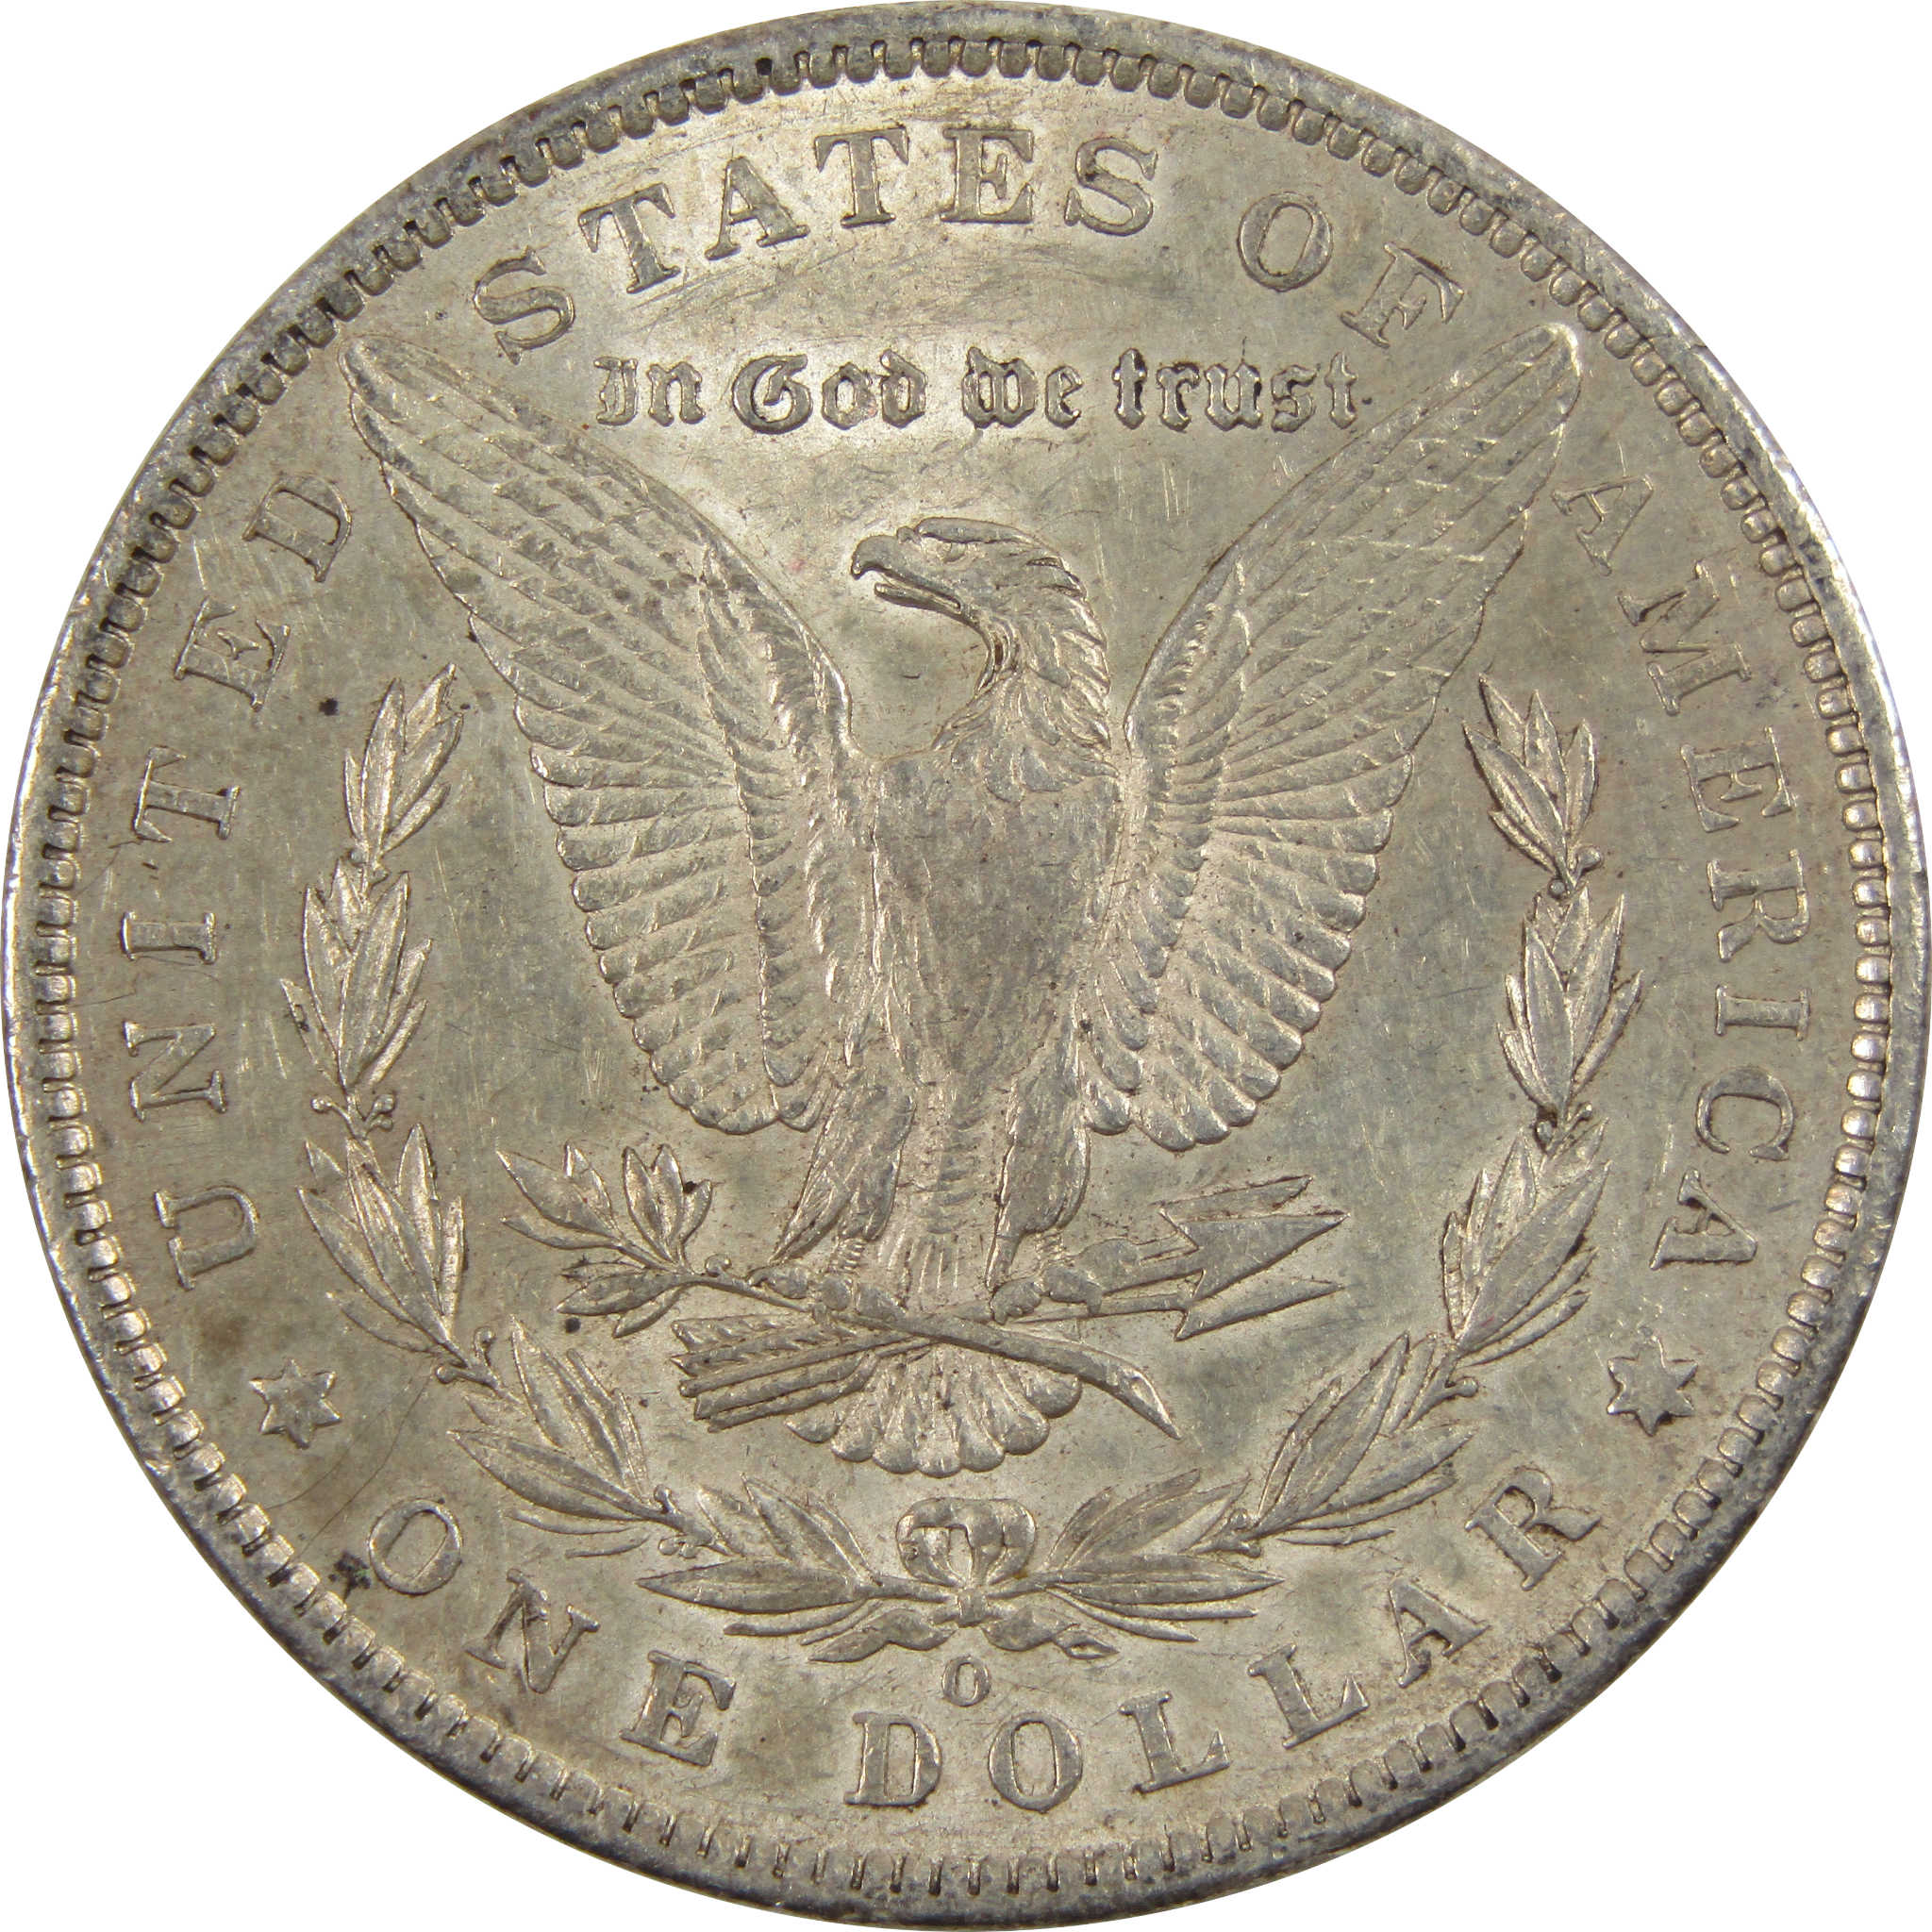 1886 O Morgan Dollar AU About Uncirculated 90% Silver SKU:I8196 - Morgan coin - Morgan silver dollar - Morgan silver dollar for sale - Profile Coins &amp; Collectibles